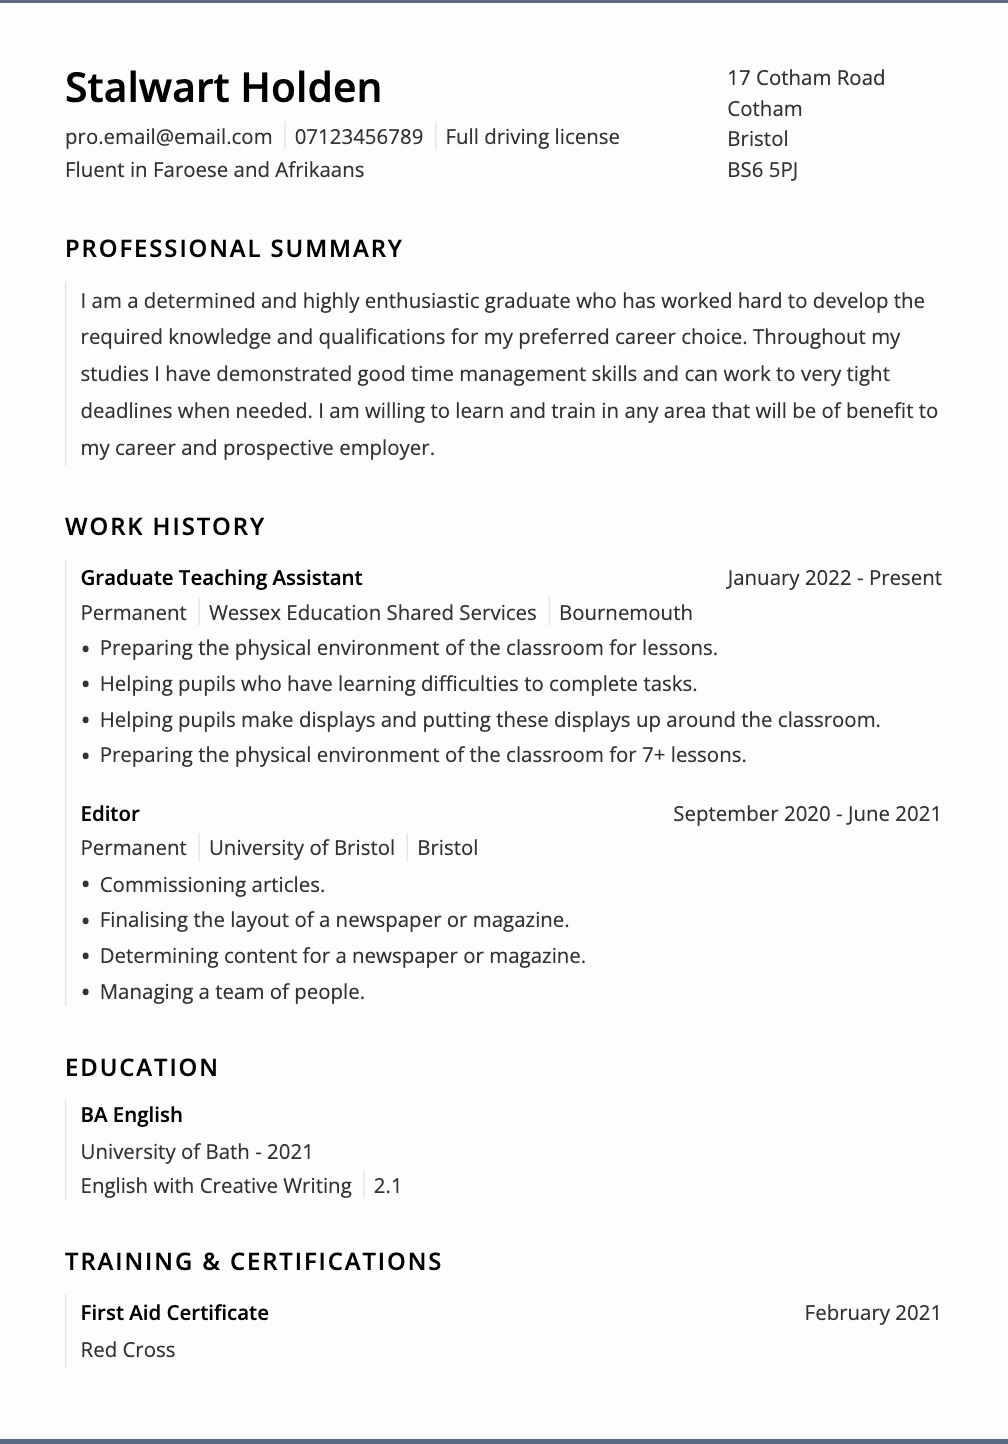 CV Library CV template with no colours or visual elements